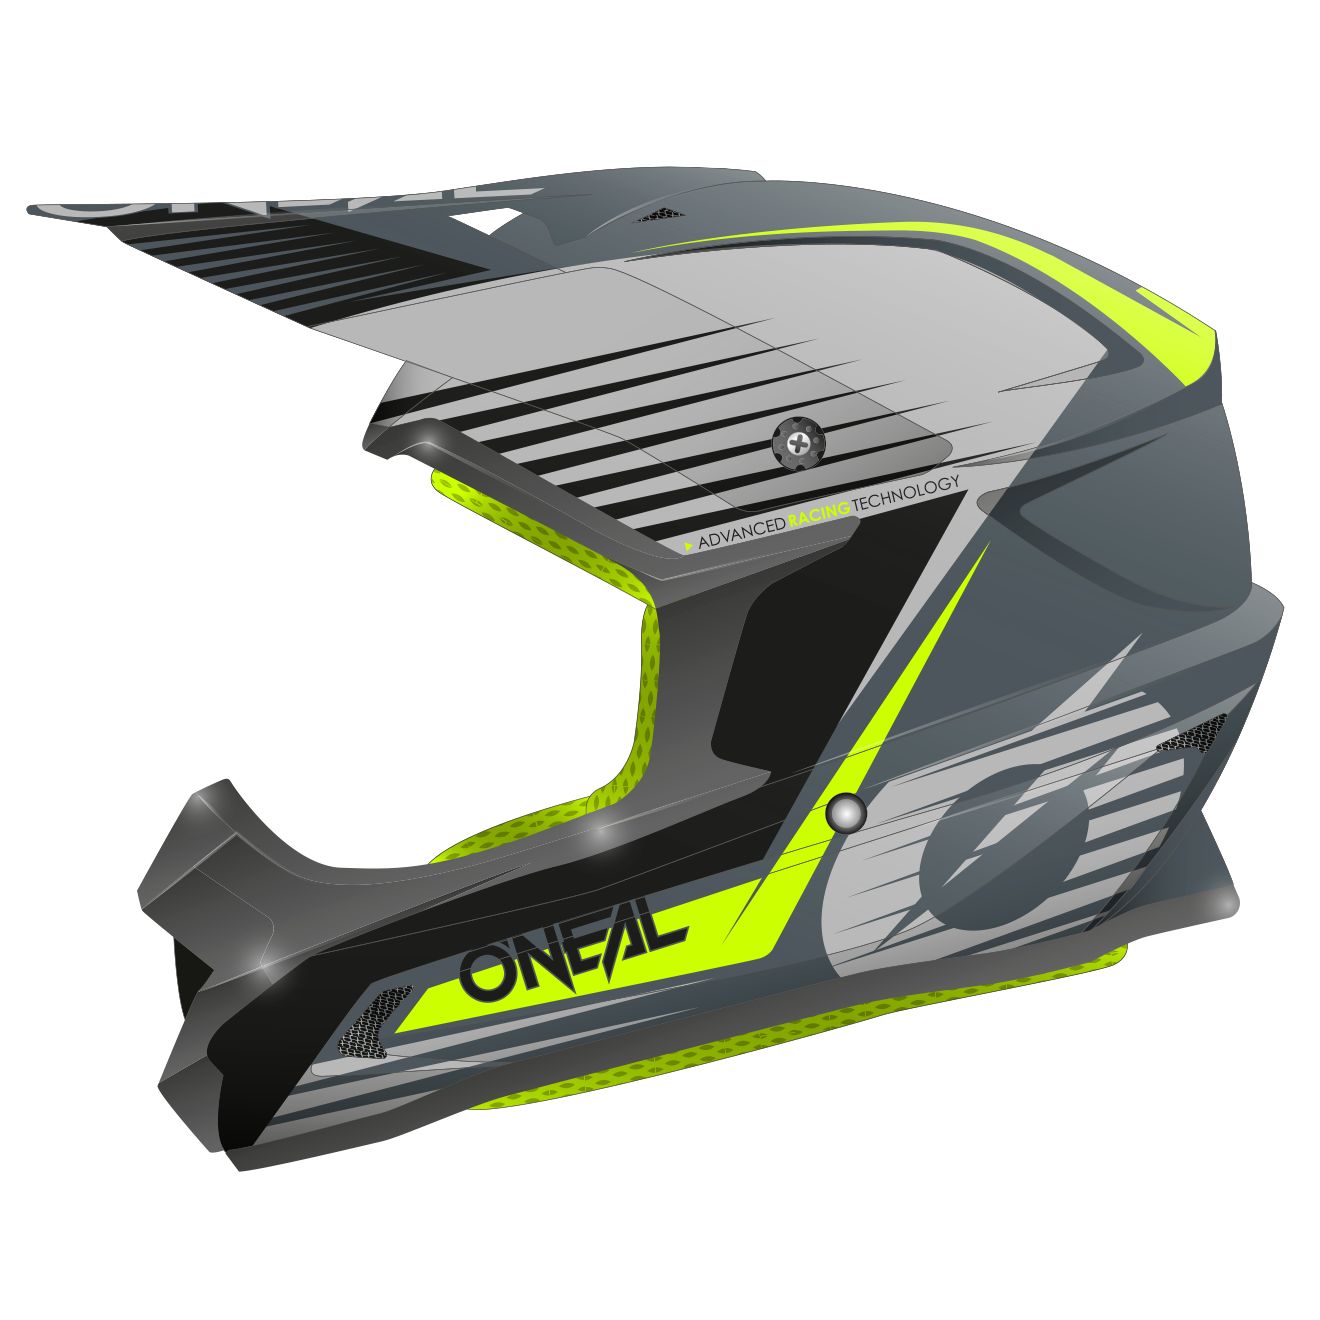 Image of Casque cross O'Neal 1 SRS - YOUTH STREAM - GRAY NEON YELLOW GLOSSY